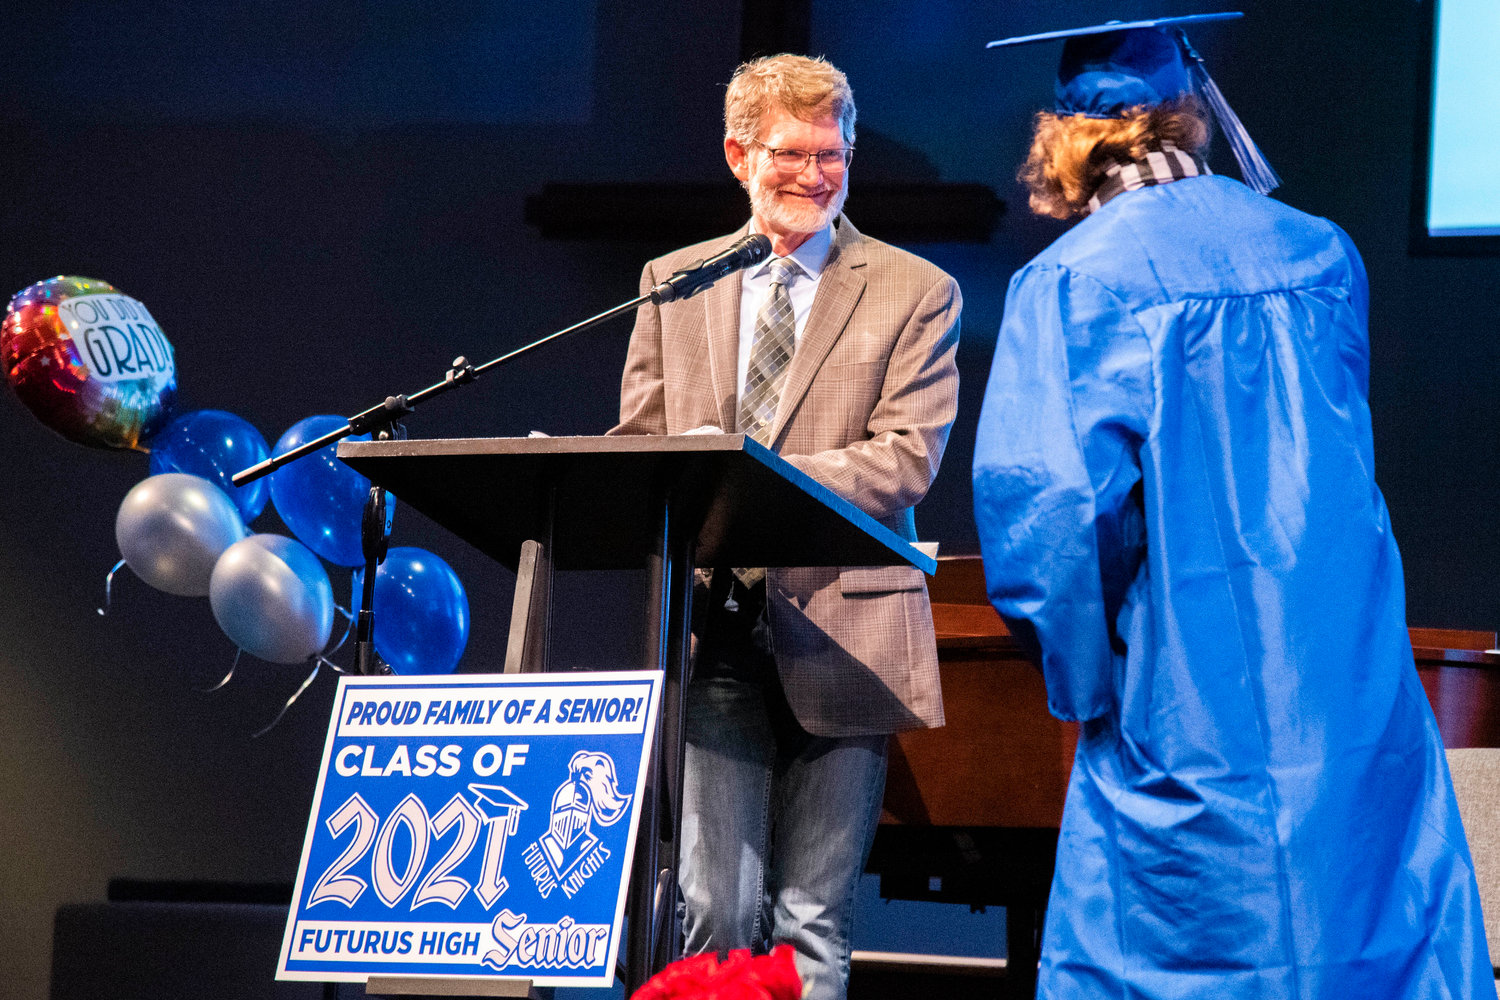 Steve Warren smiles as he announces the names of graduates during the Futurus High School graduation ceremony at the Centralia Community Church of God on Tuesday.